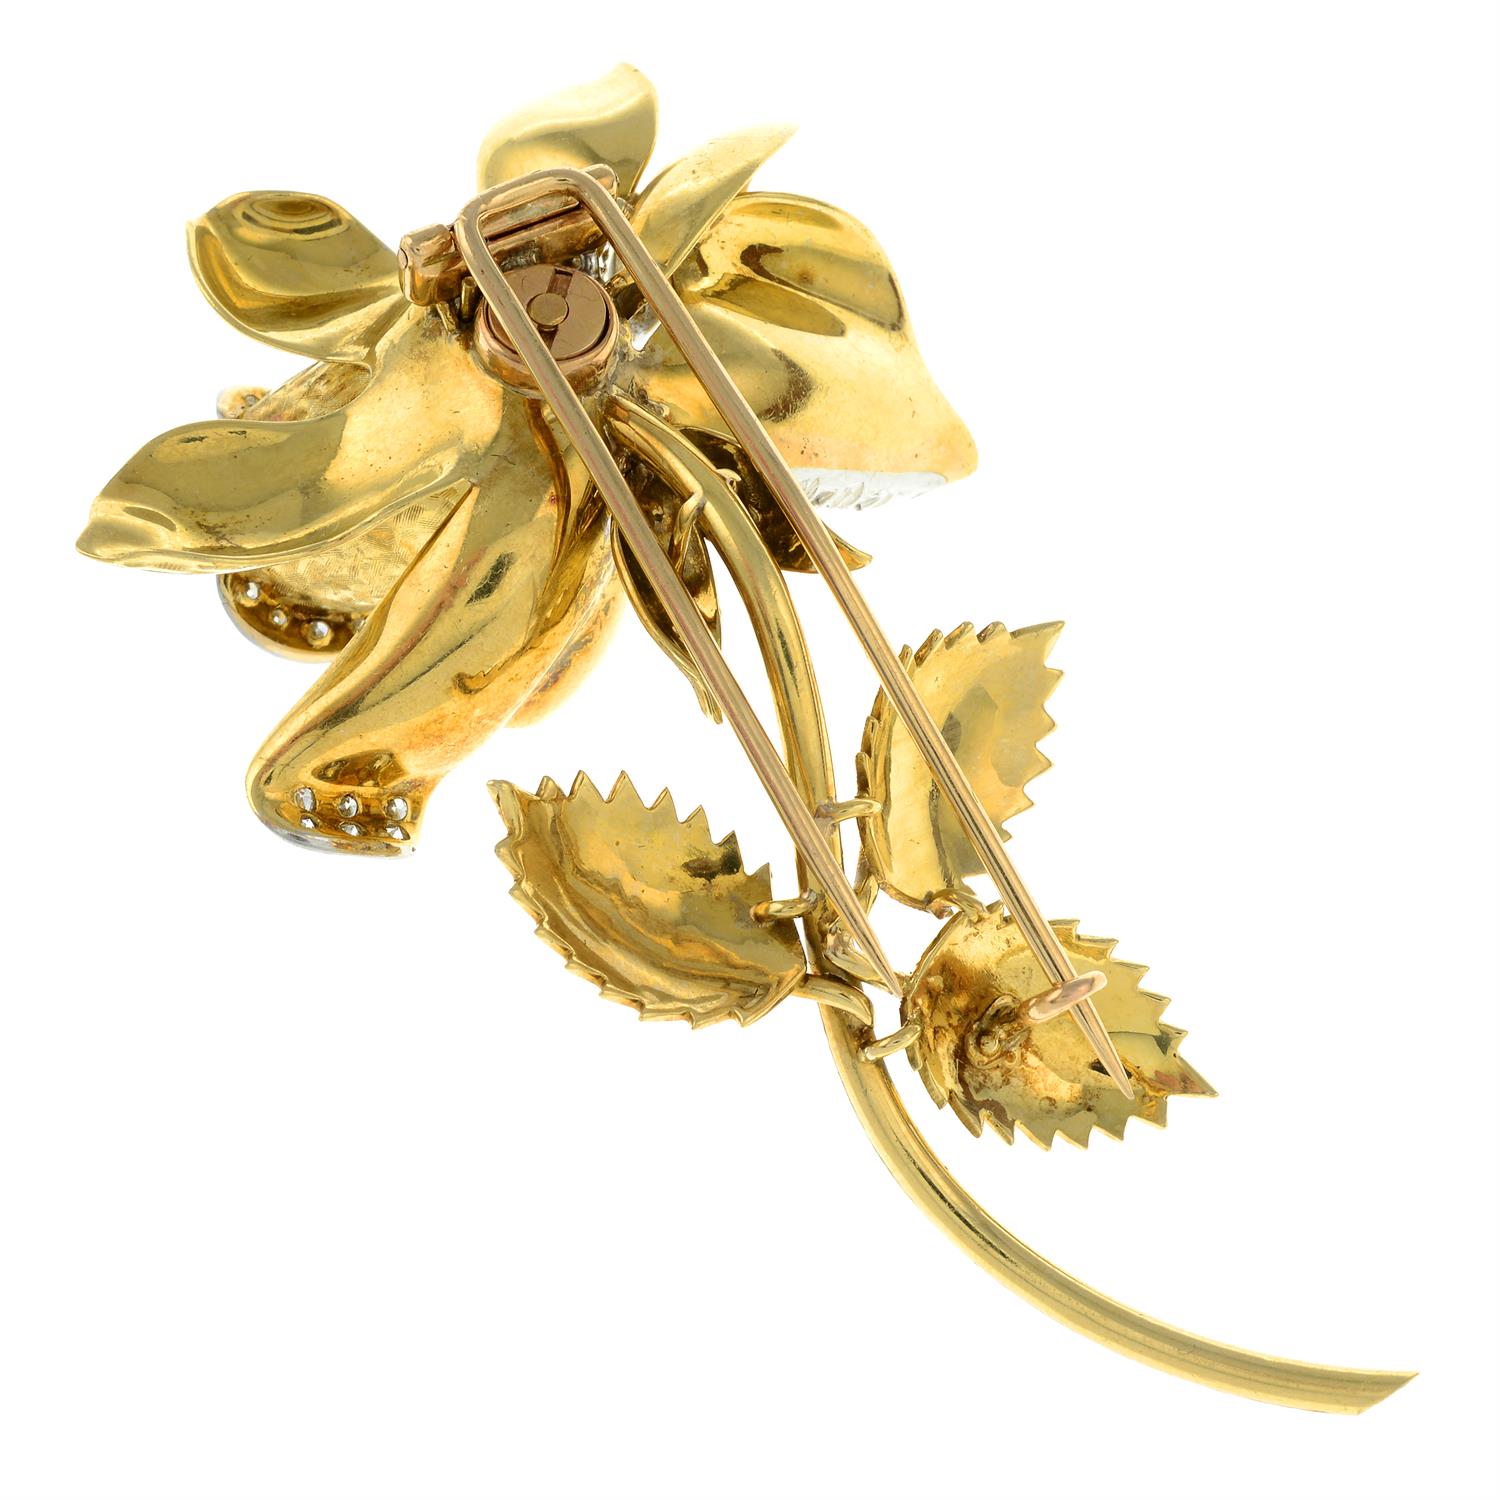 A mid 20th century 18ct gold textured rose floral brooch, with pavé-set diamond highlights. - Image 2 of 3